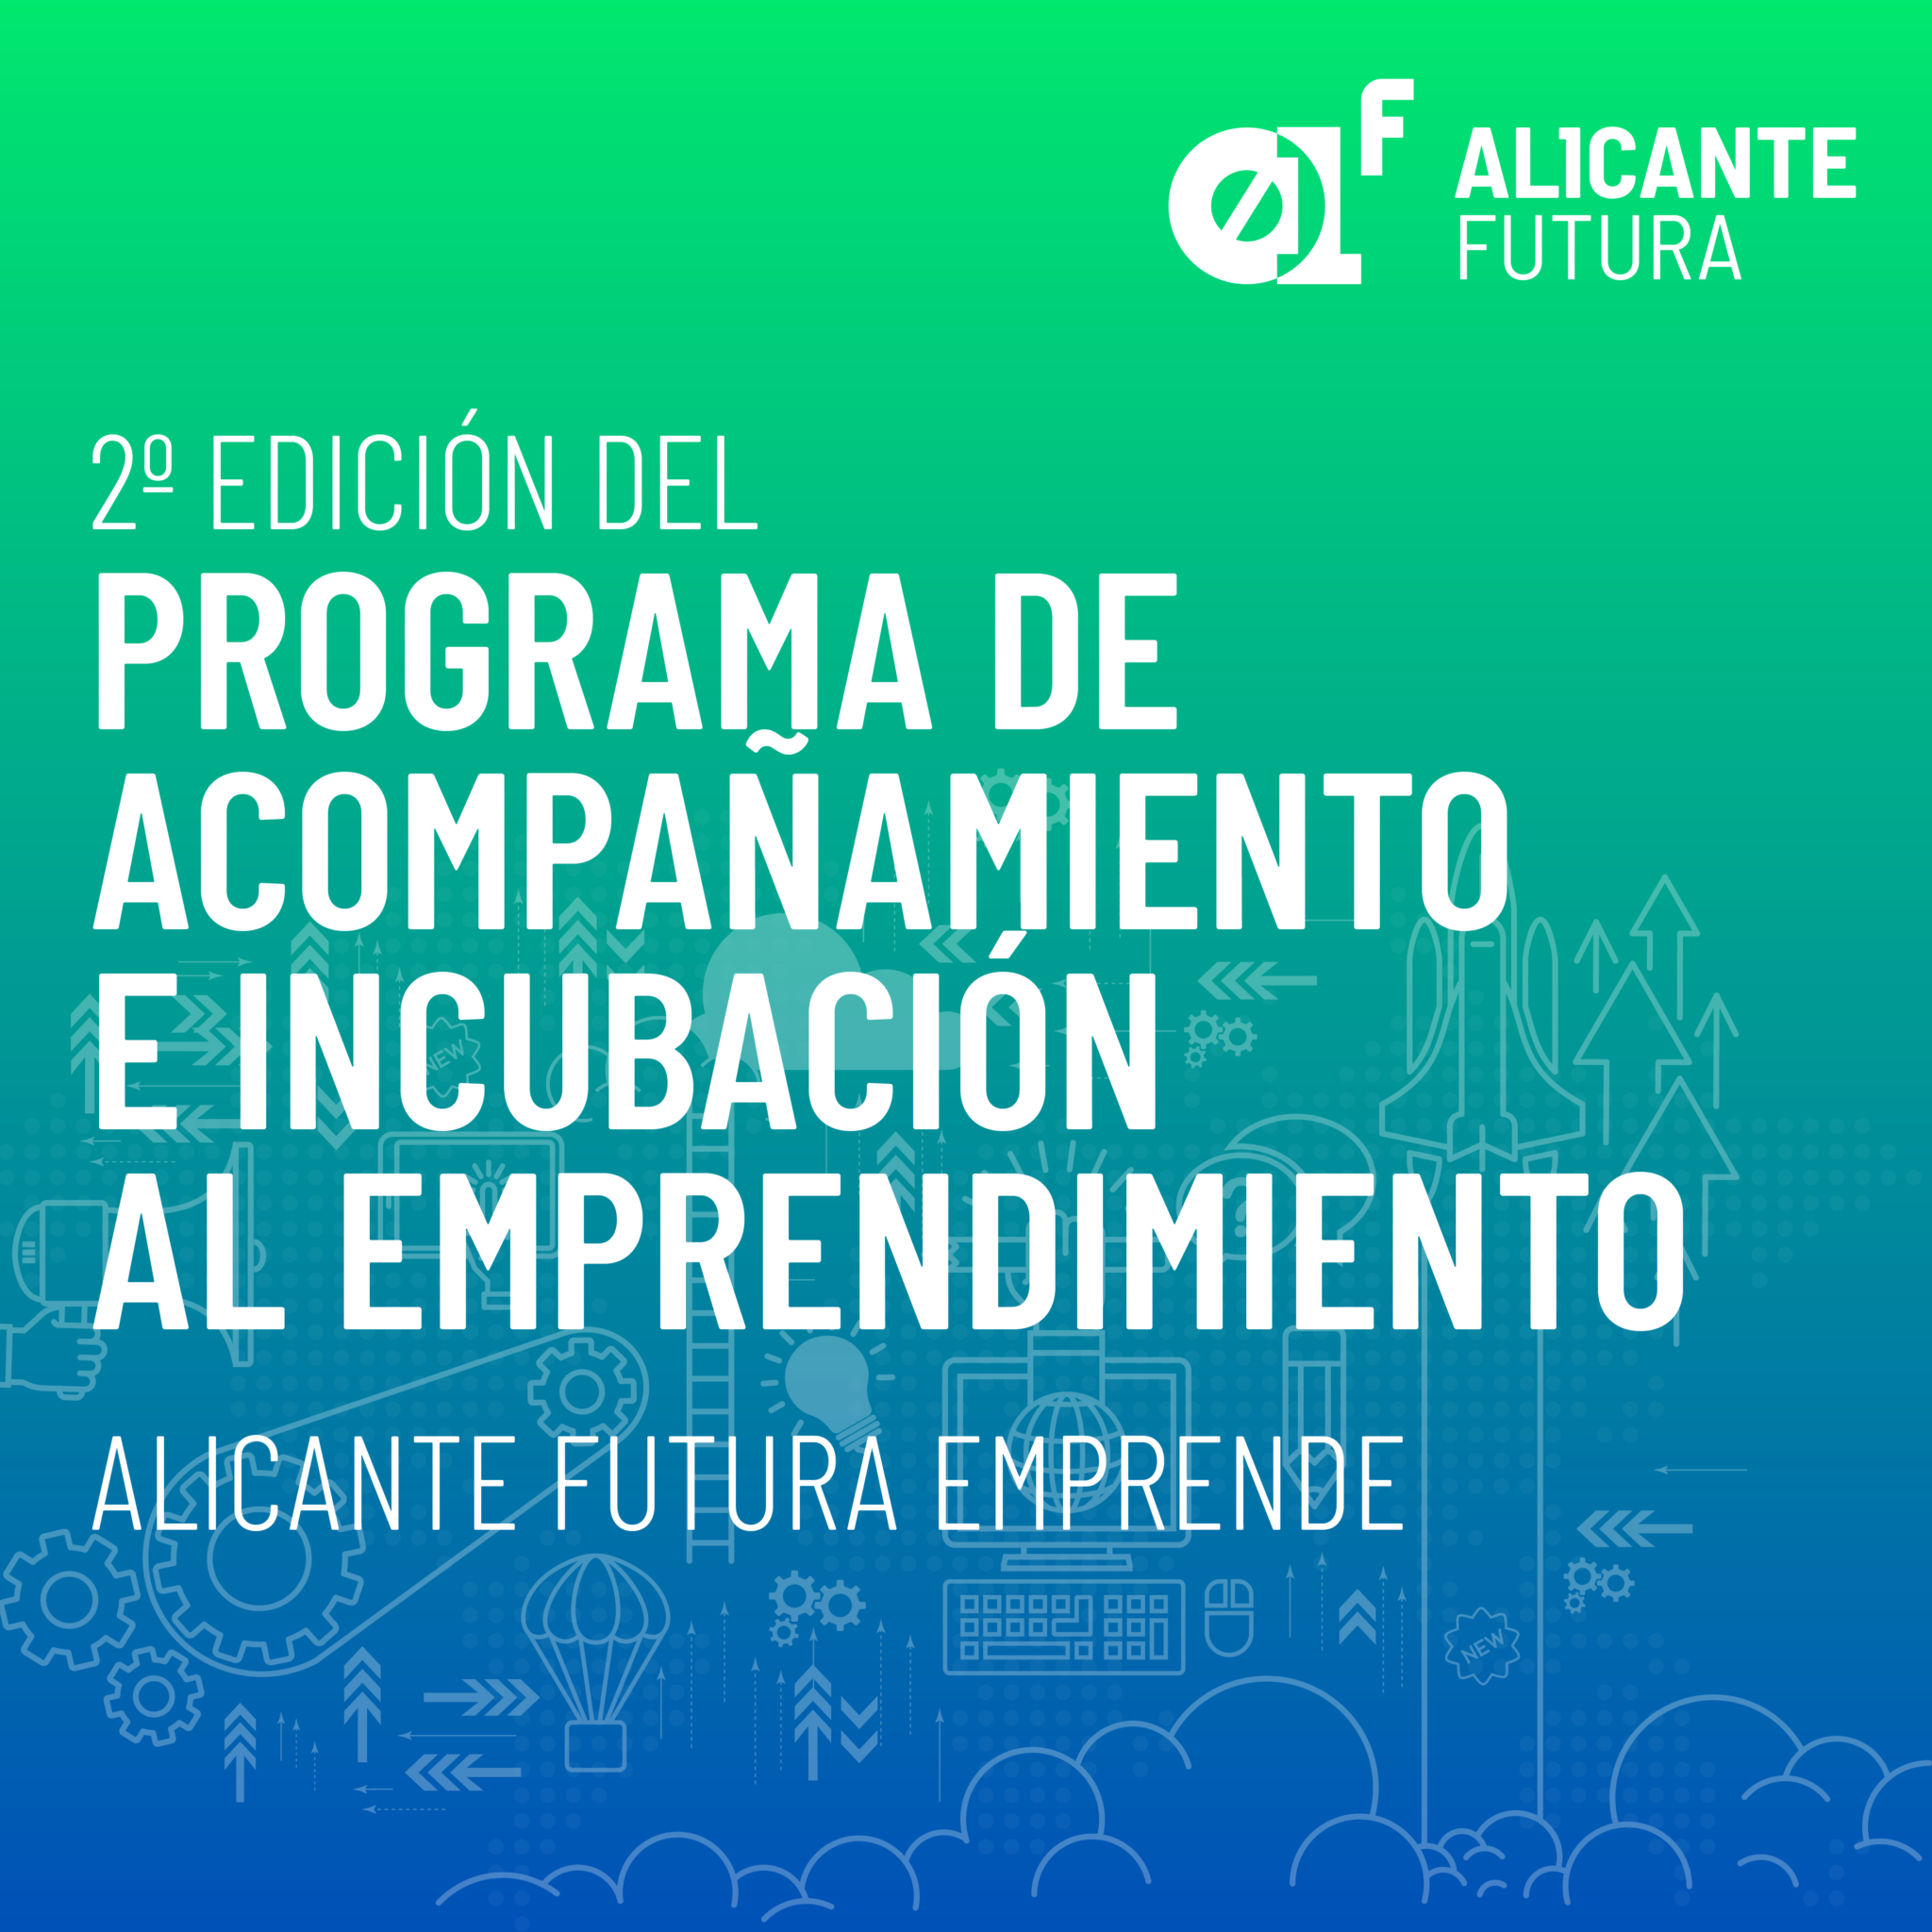 2nd Edition of the Program for Mentoring and Incubation of Entrepreneurship ALICANTE FUTURA